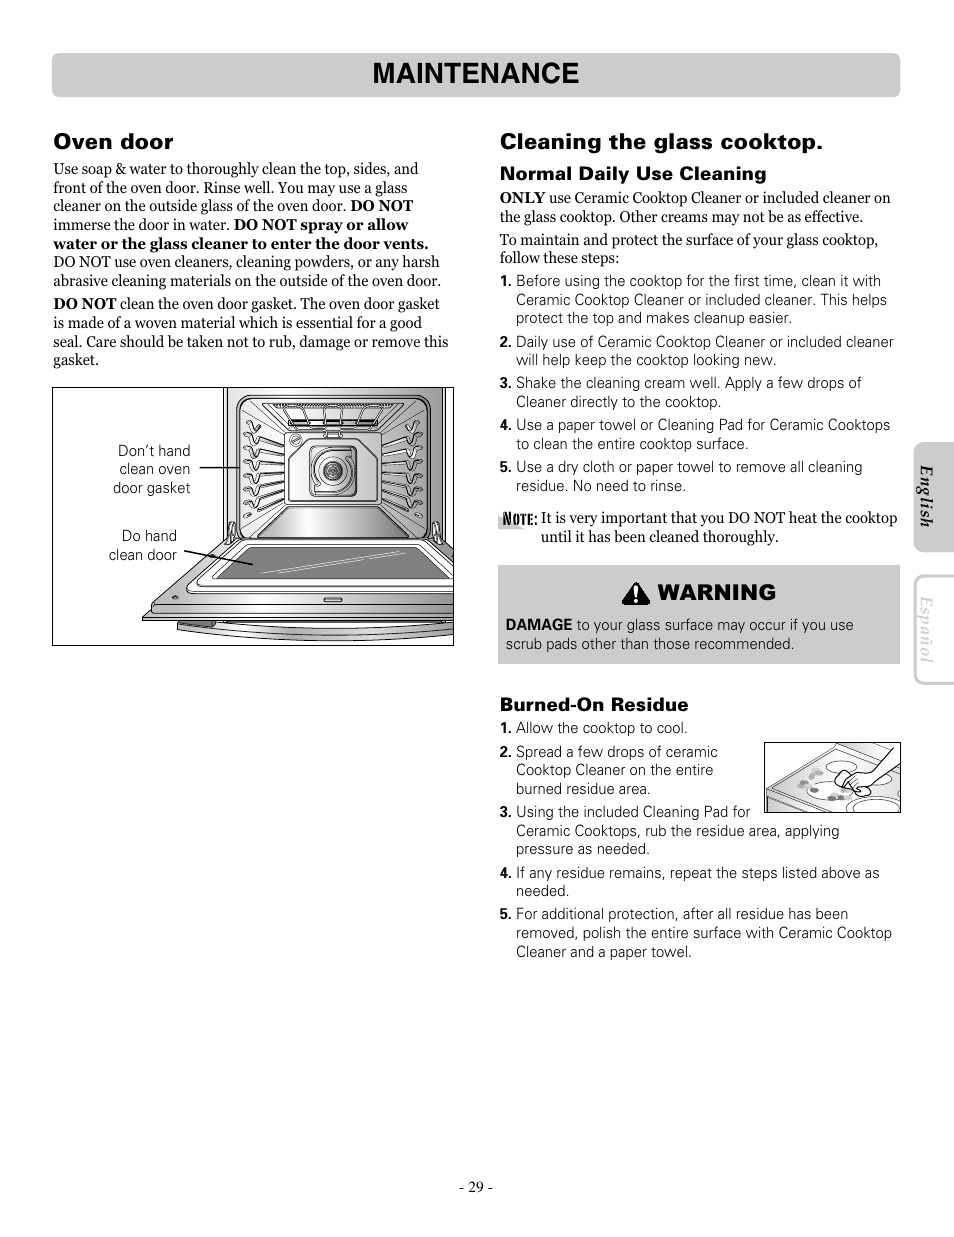 Maintenance, Oven door, Cleaning the glass cooktop | Warning | LG LRE30755SW User Manual | Page 29 / 36